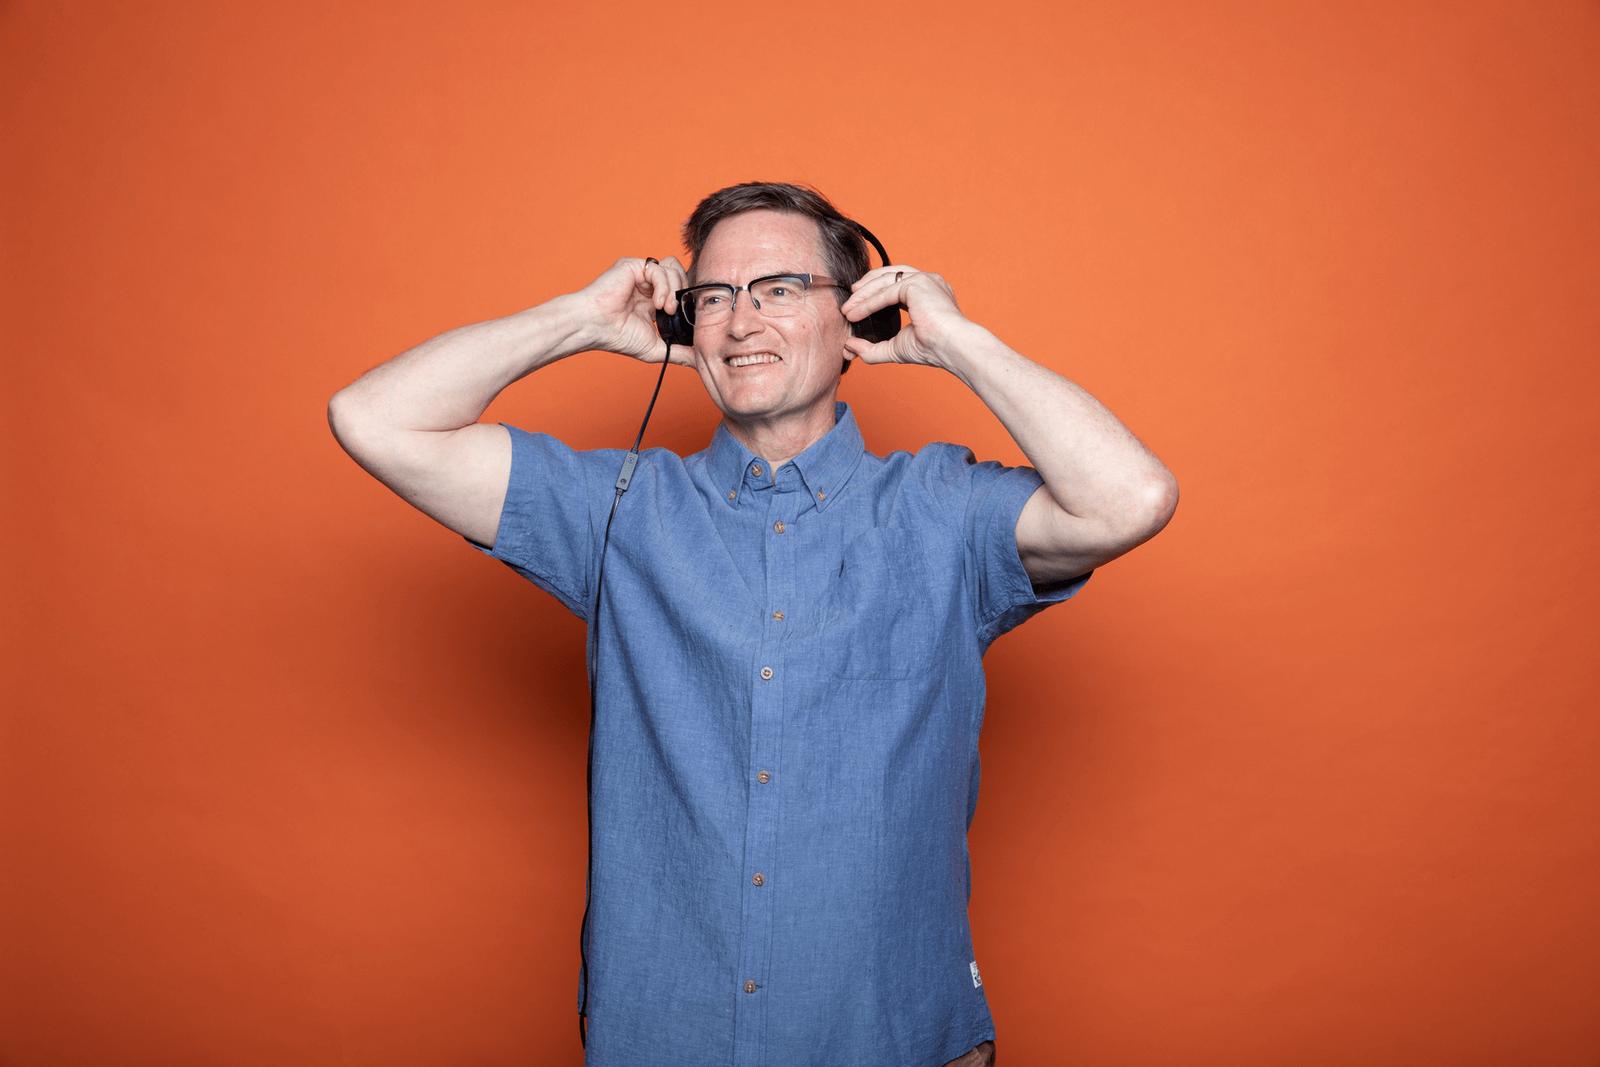 A person adjusting their headphones and smiling